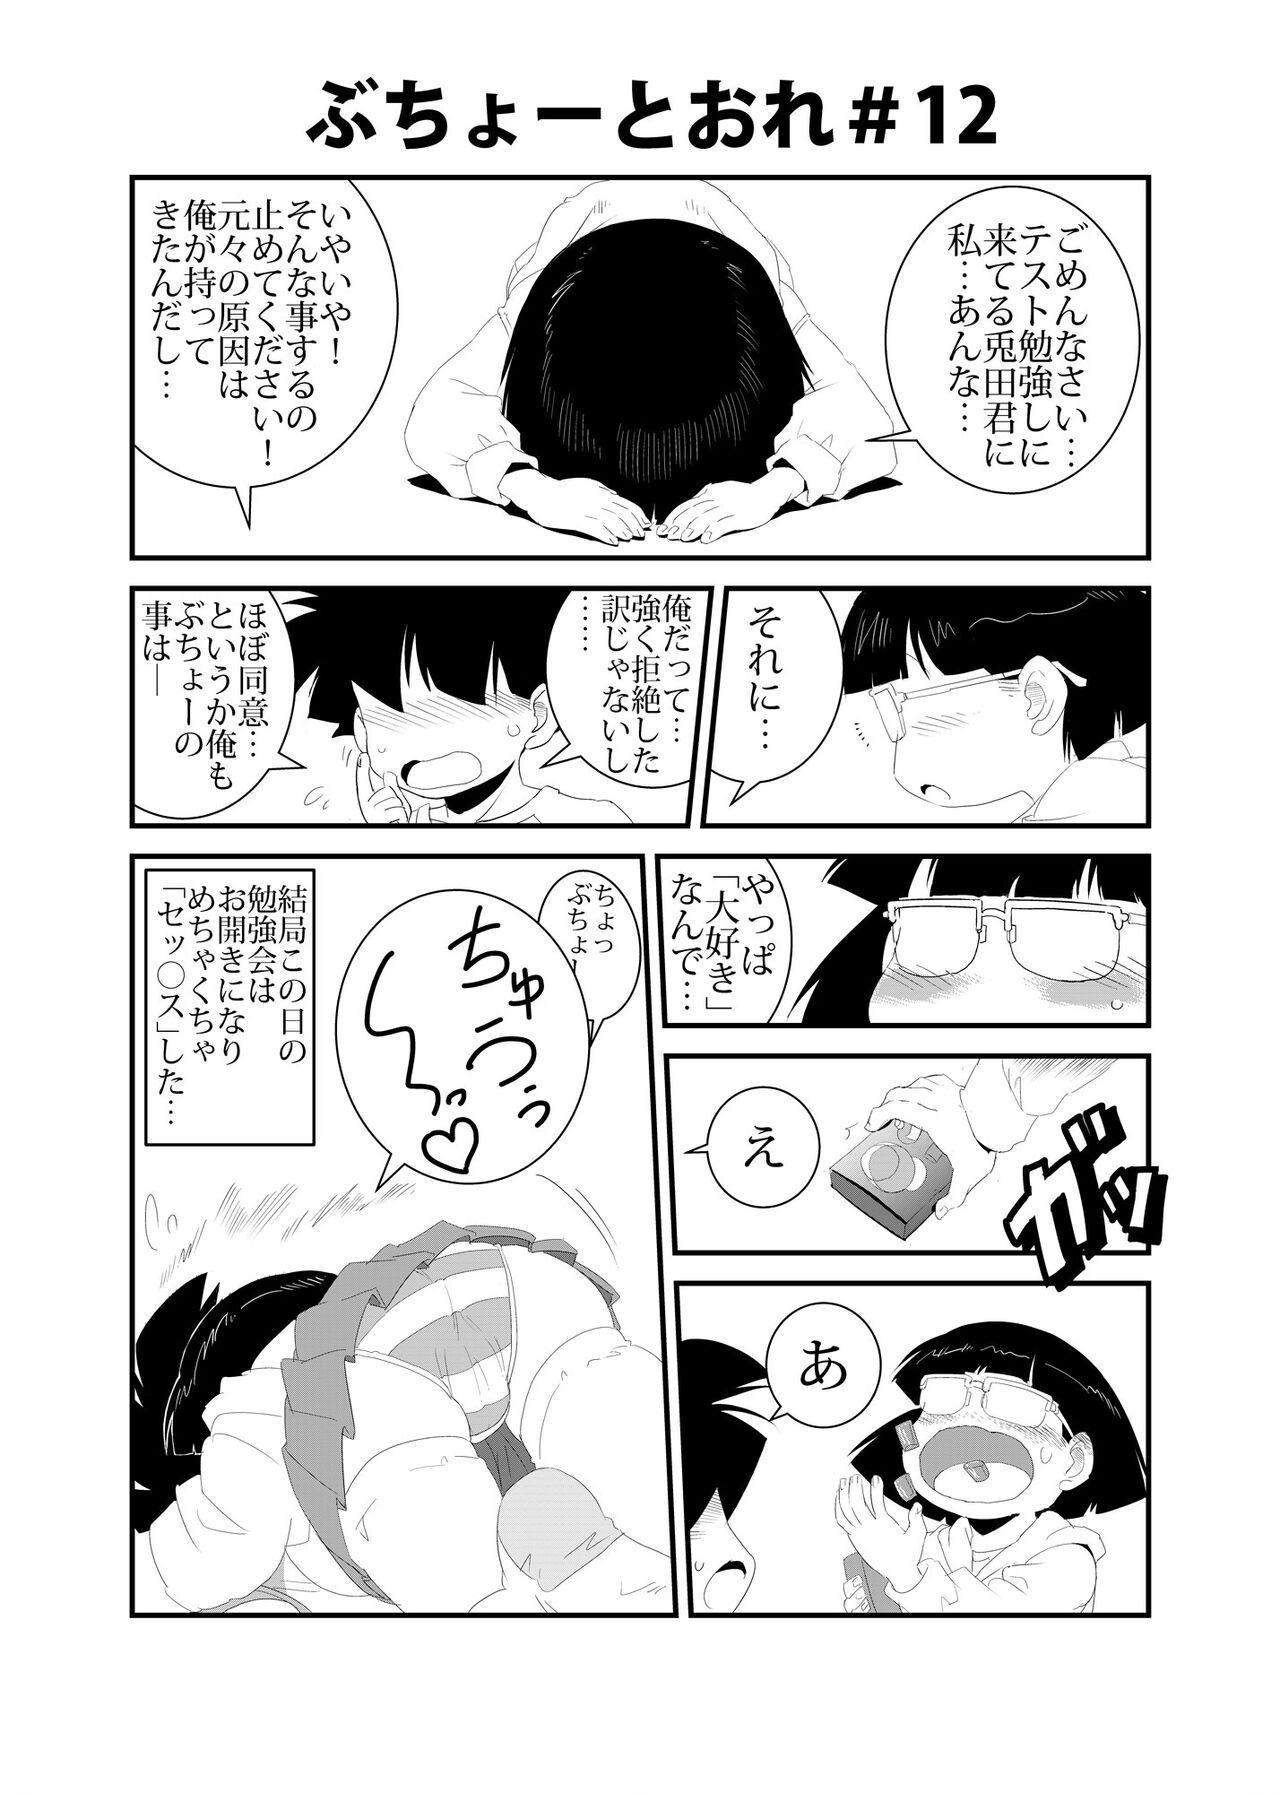 Gaystraight Buchou to Ore - Original  - Page 12